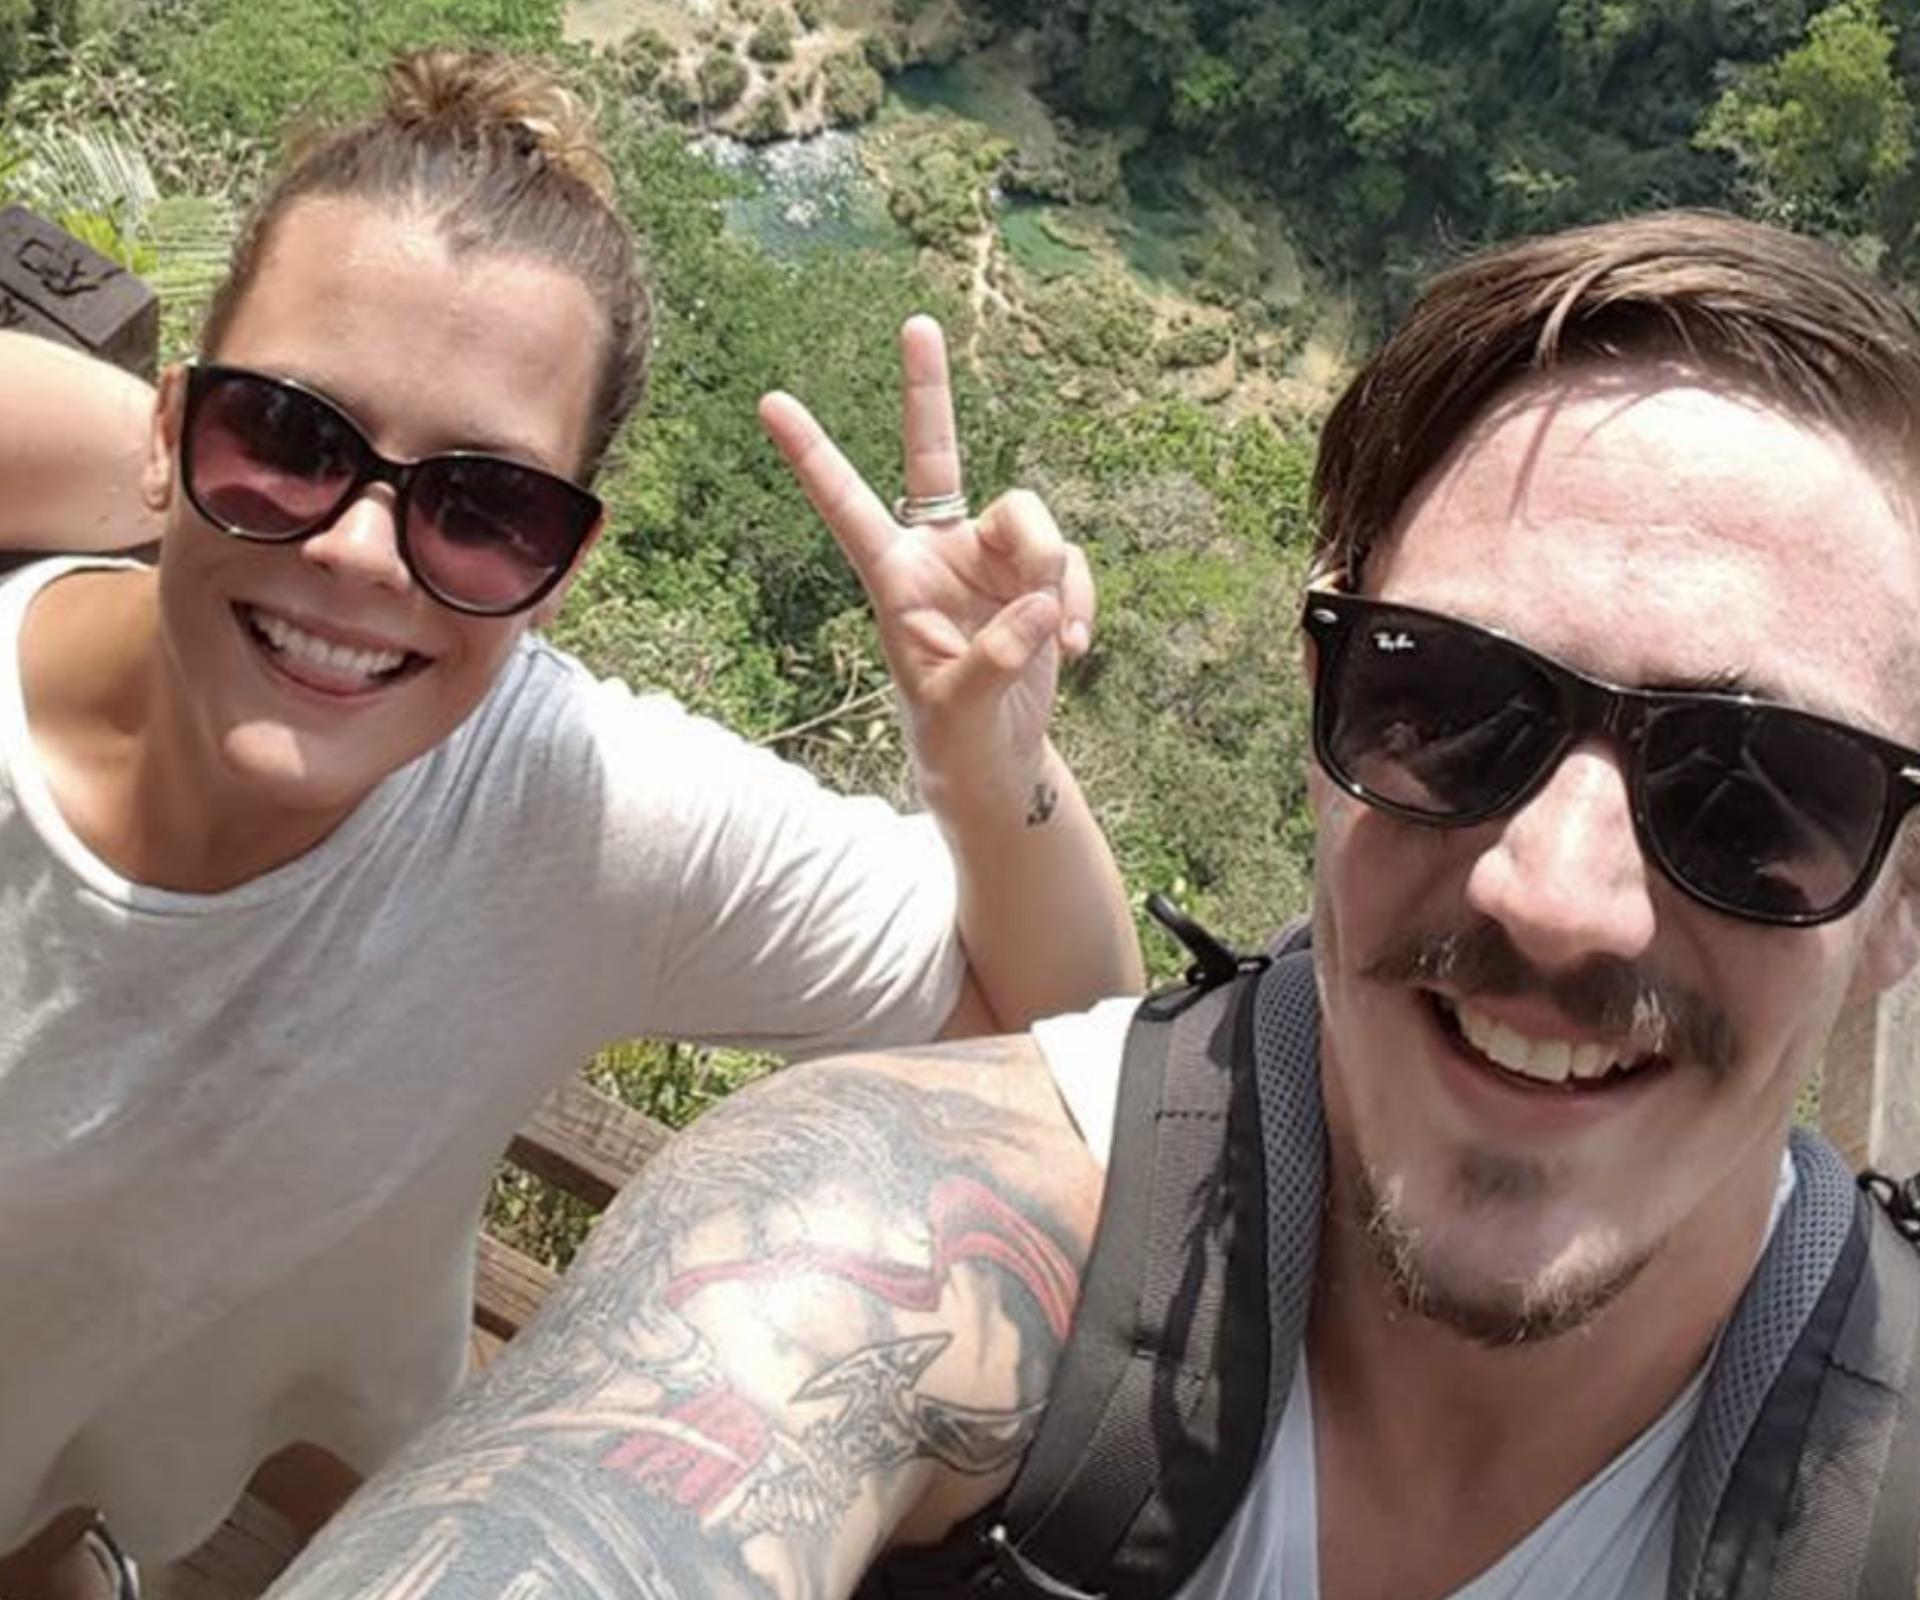 Australian couple kidnapped and robbed at gunpoint while backpacking through Guatemala